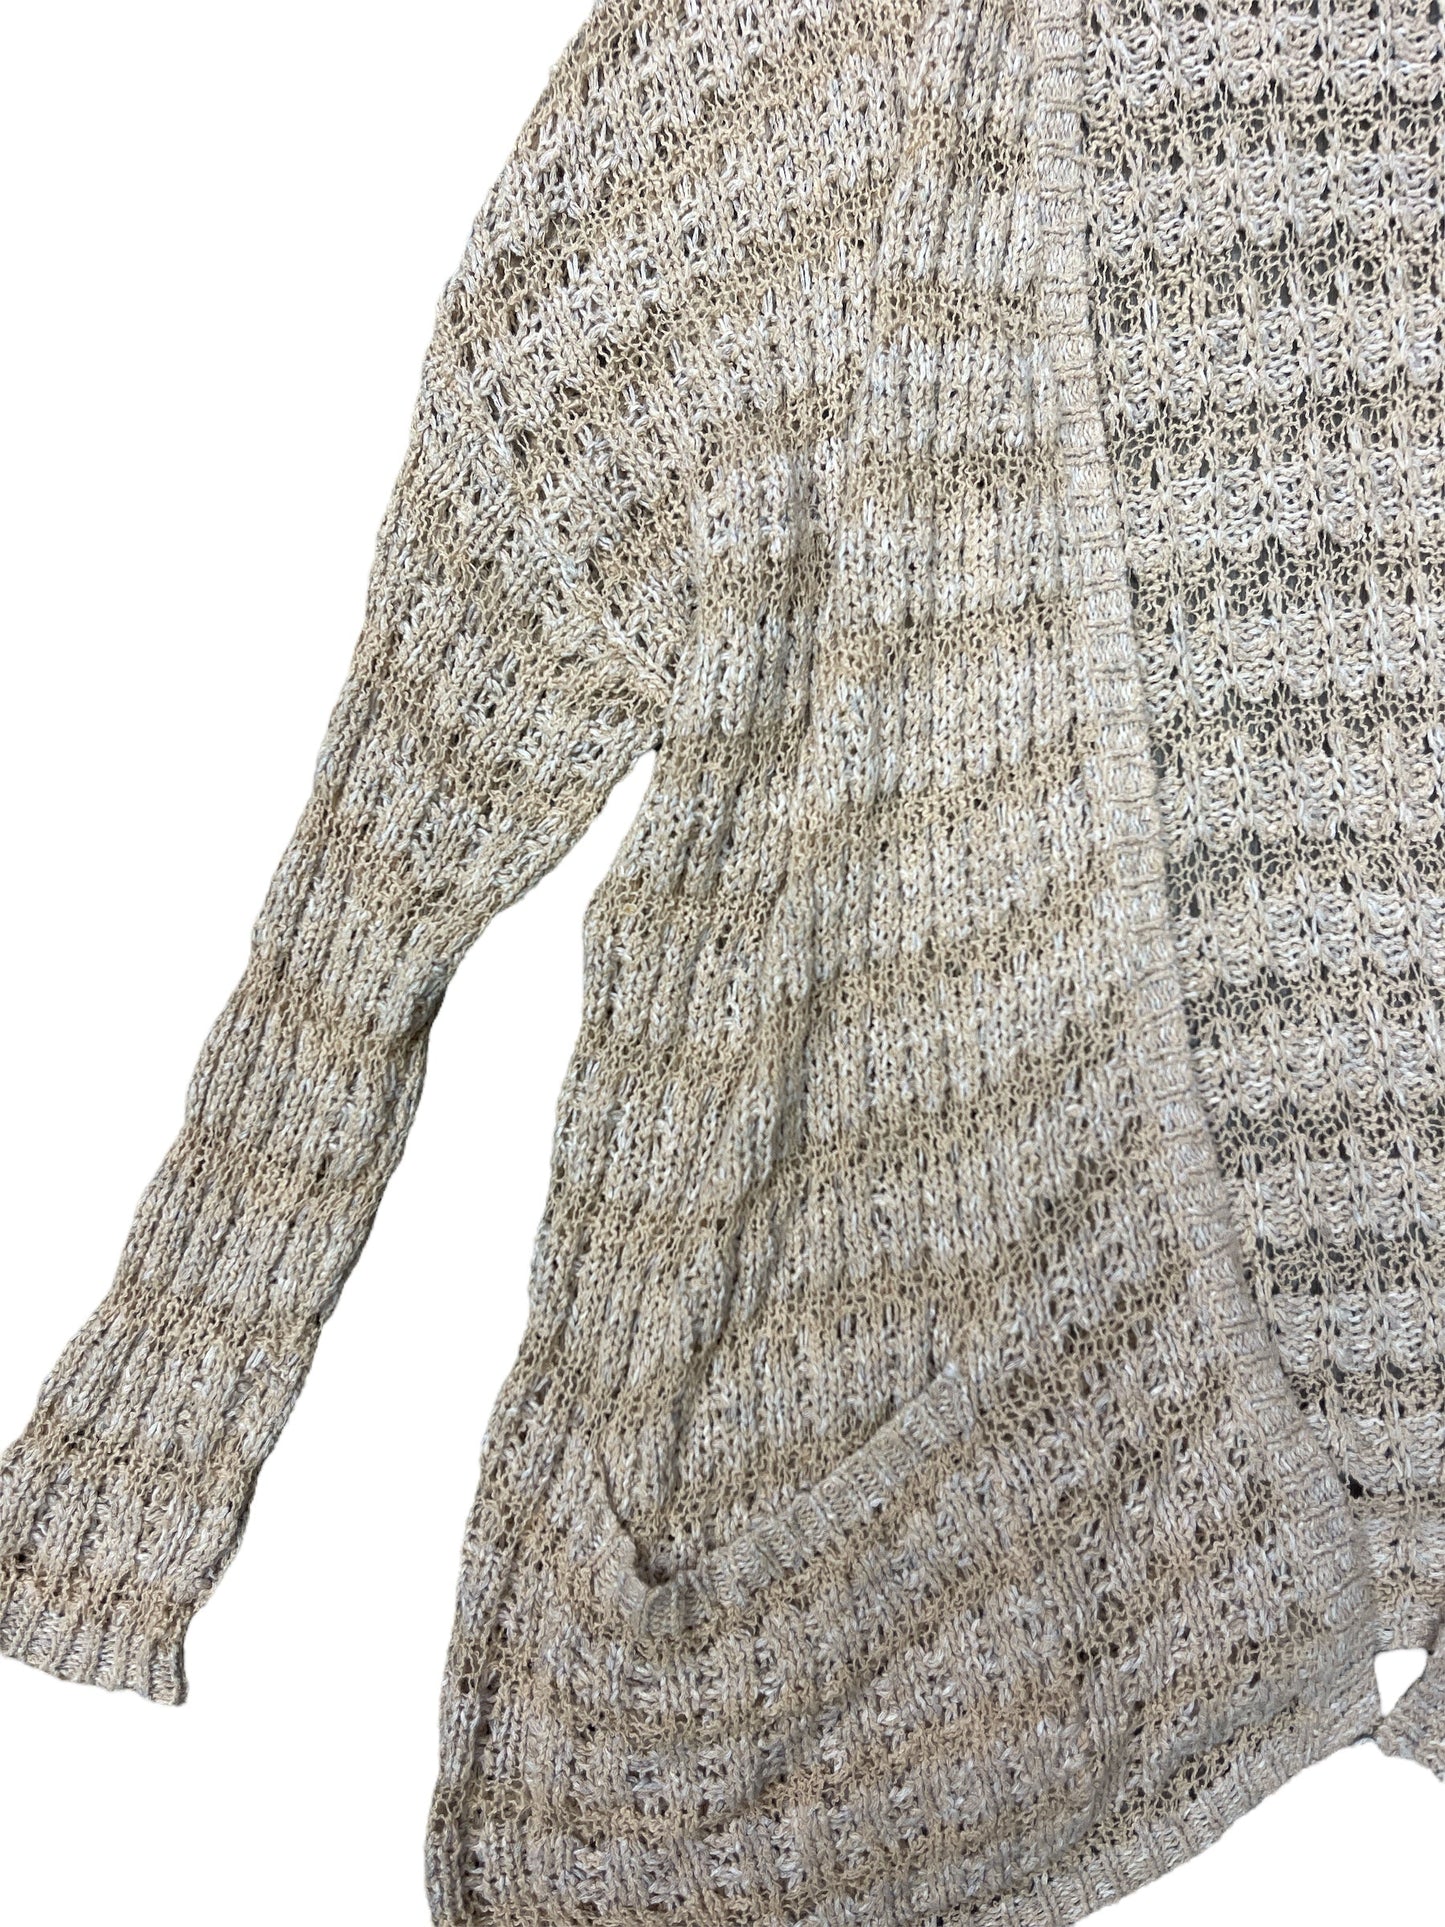 Cardigan By Free People  Size: S